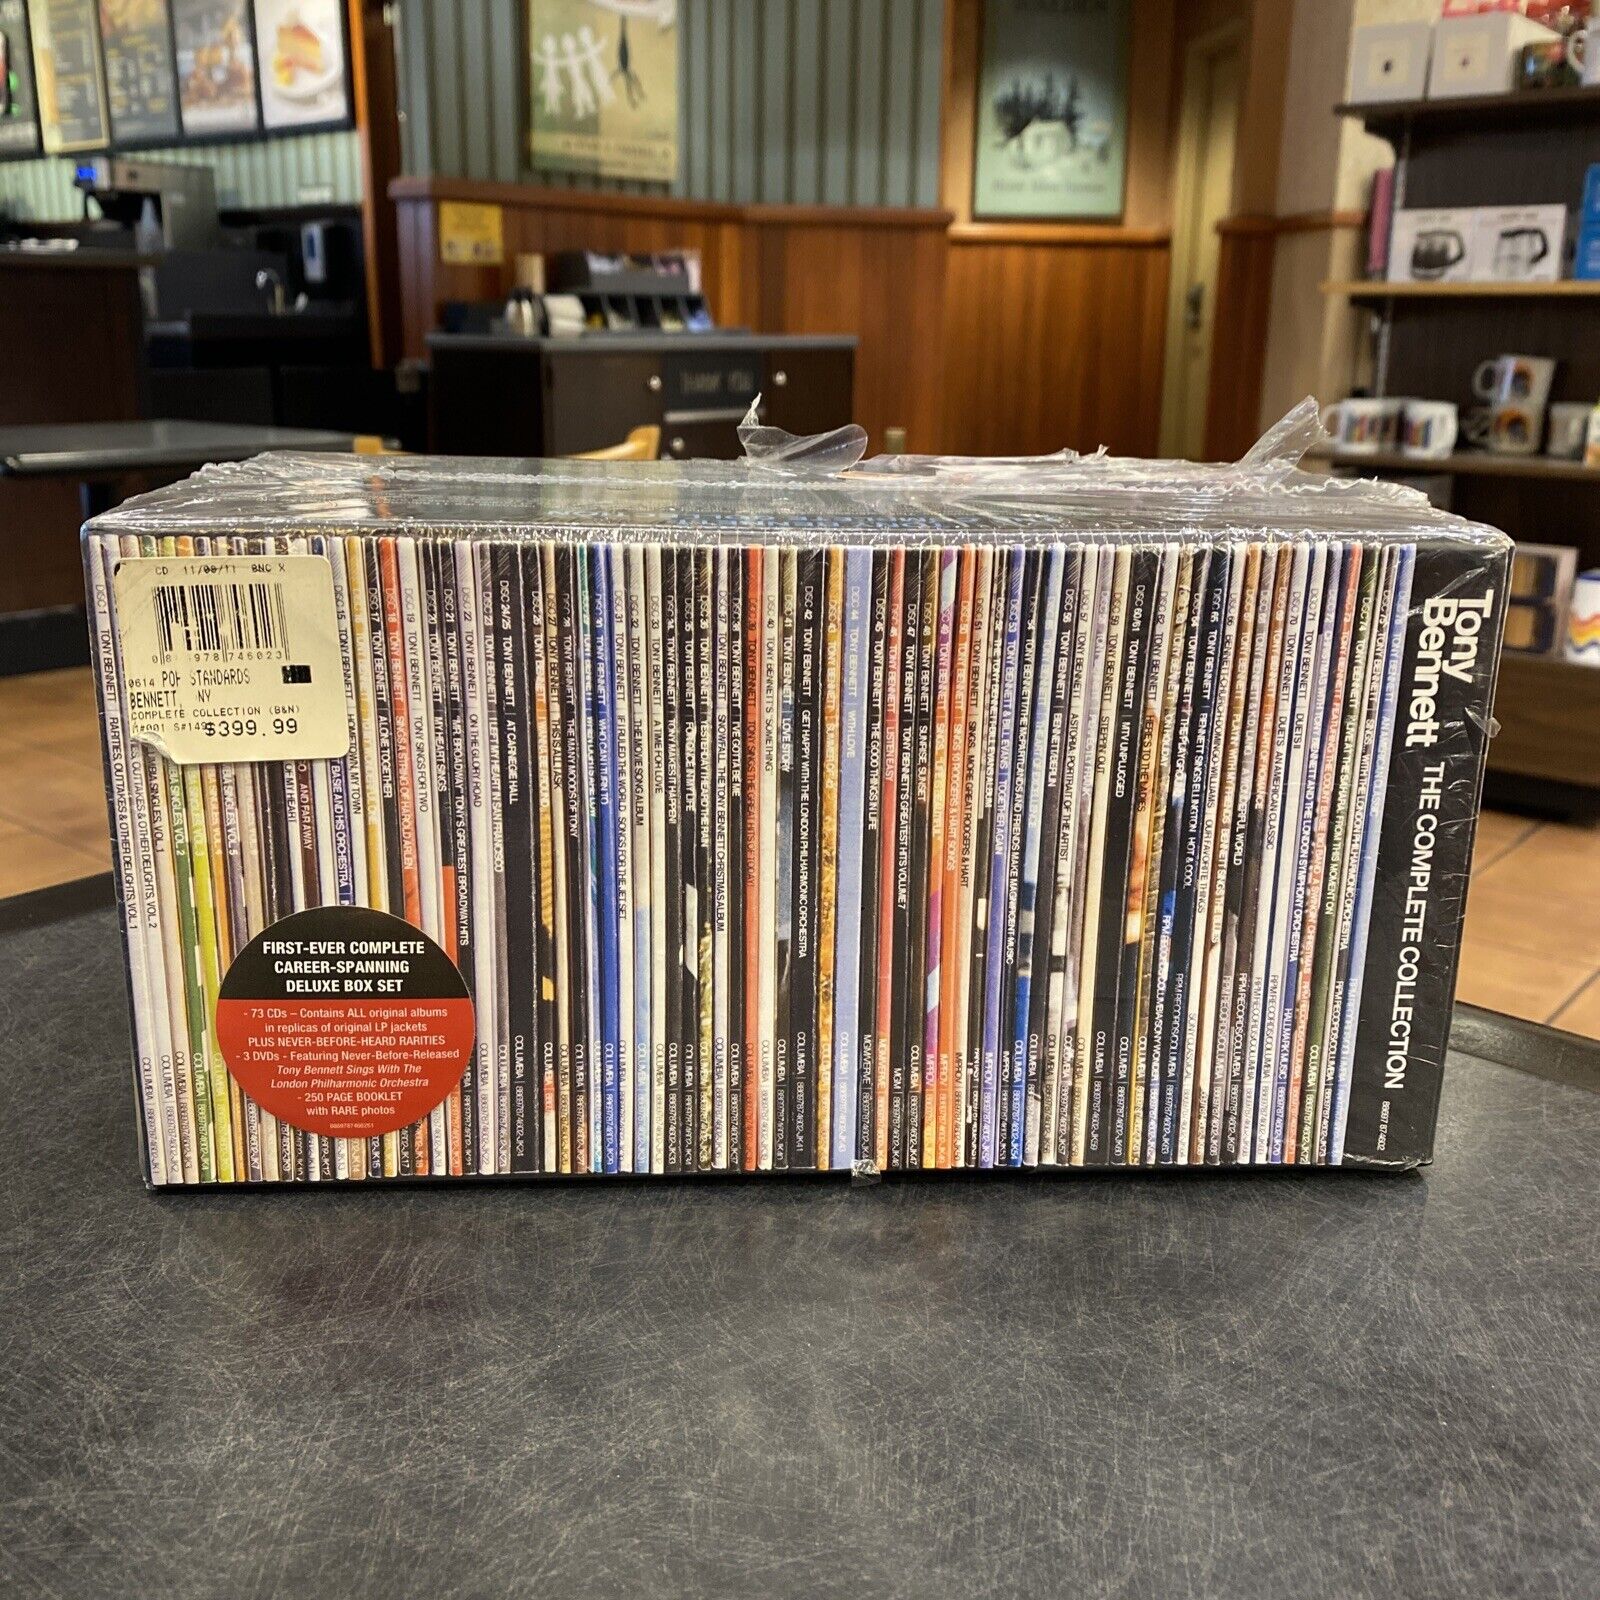 NEW Tony Bennett The Complete Collection Box Set 73 CDs/3 DVDs/Booklet $399.99